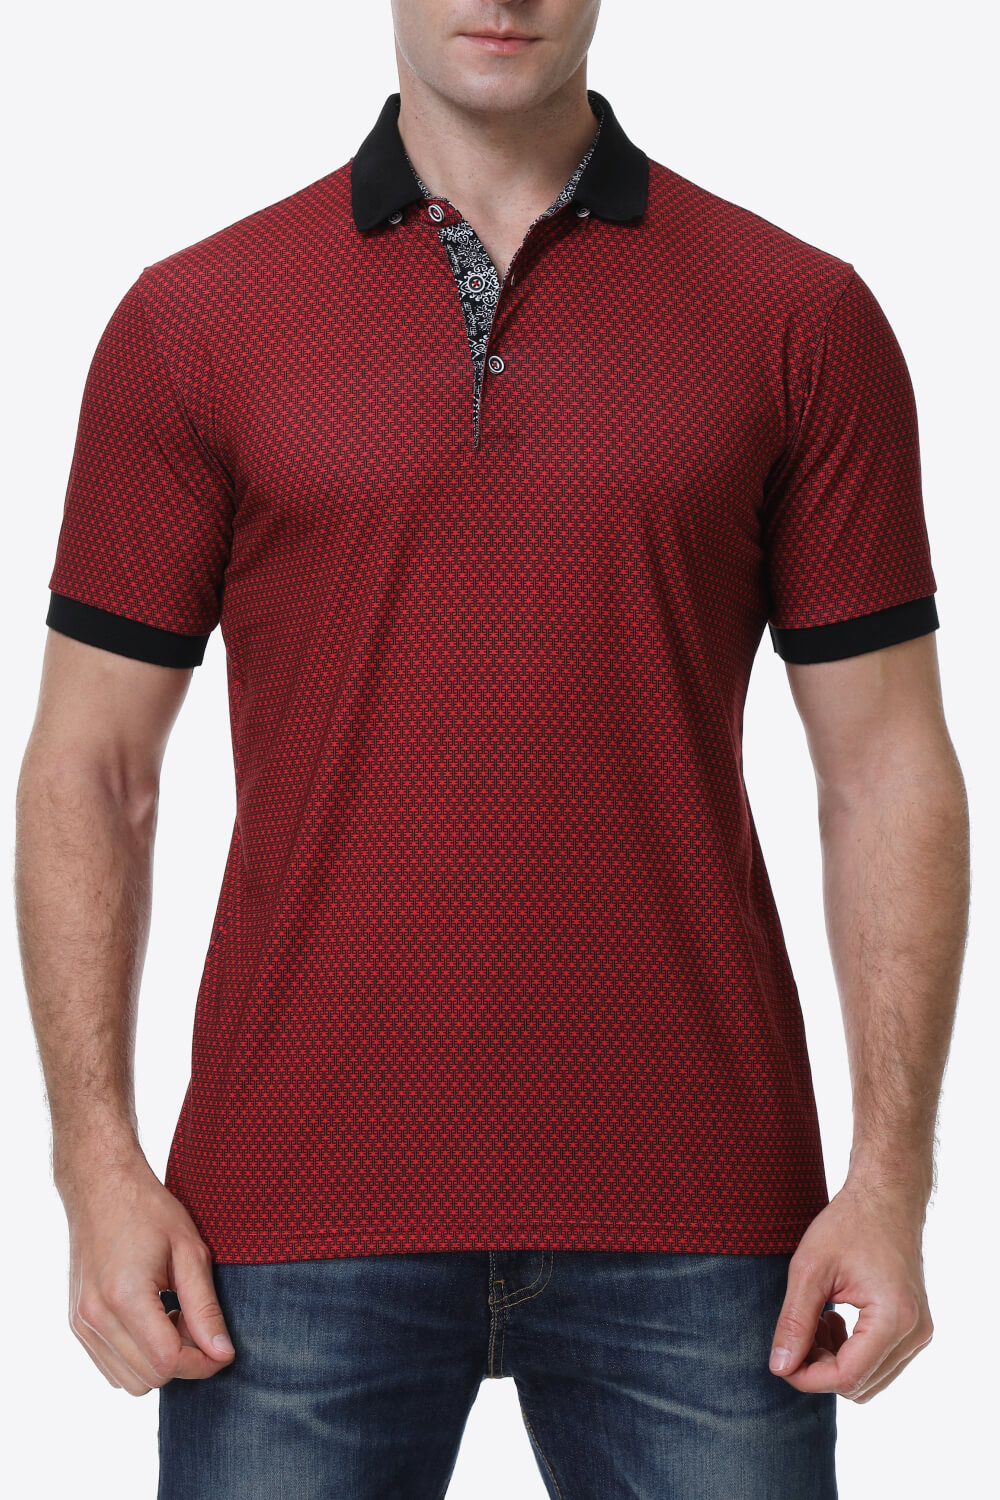 Men's Shirts and Tops